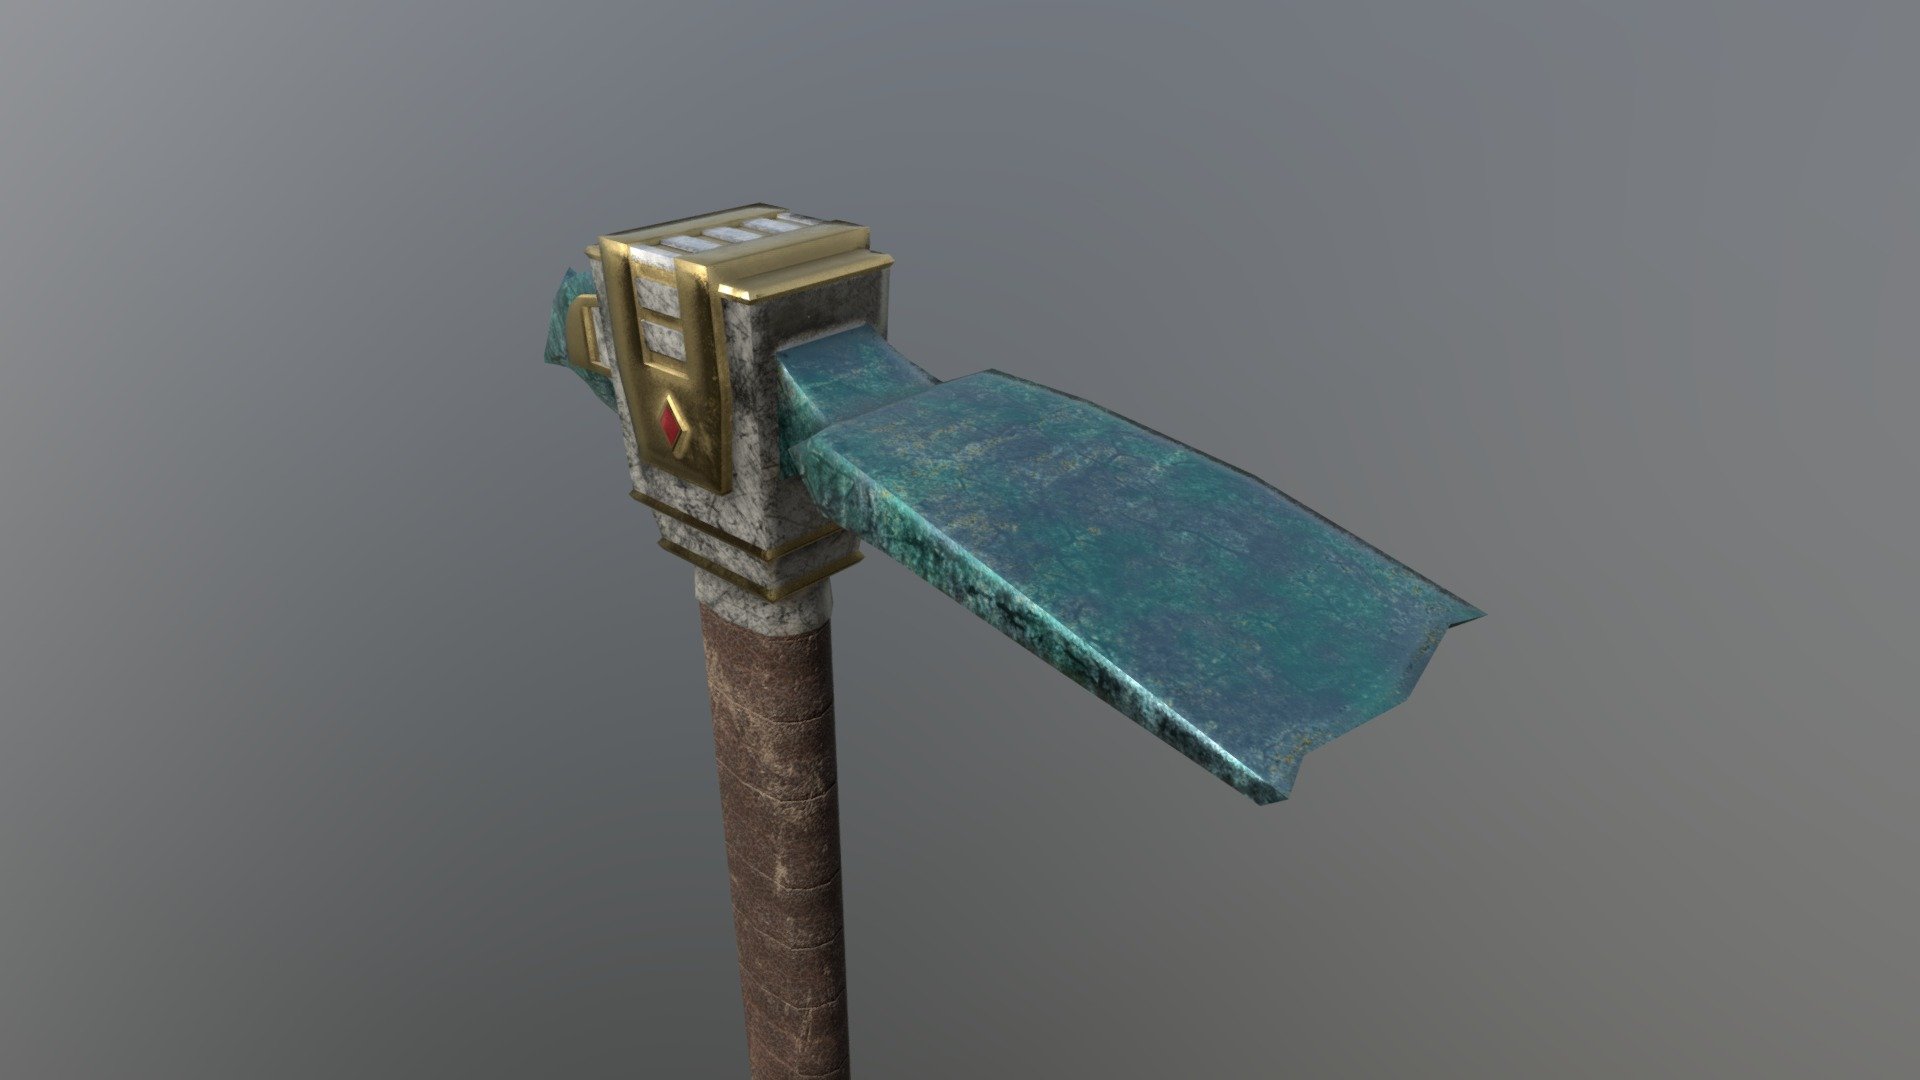 Enhance your best survival/crafting projects (game, render, advertising, design visualization, VR/AR&hellip;) with this awesome Adamantite Hoe !

Game-ready !

Low-poly but very high quality material for the best visual and performance. Ideal for VR/AR games !

PBR material ready-to-go optimized for multiple engines and rendering software (Unity, Unreal Engine, Crysoftware, Blender&hellip;)

Technical Details

-&gt; 1 High-detail mesh but very optimized in poly-count :




556 Vertices | 462 Faces | 855 Tris

Clean mesh, only planar quads and tris

Smoothing group, pivot point and Position/Rotation/Scale already set

Real-size object

-&gt; 1 PBR Material

-&gt; 4 Textures in 2k resolution :




Albedo/Diffuse/Color map

Metalic/Roughness map

Normal map

Ambient Occlusion map

-&gt; UV Map clean and no-overlapping.

-&gt; Modelized in Blender and textured in Substance Painter.

-&gt; Multiple file available : .blend, .fbx, .obj, .unitypackage.

For any more informations, don't hesitate to contact me ! - Hoe Adamantite - Buy Royalty Free 3D model by Arigasoft 3d model